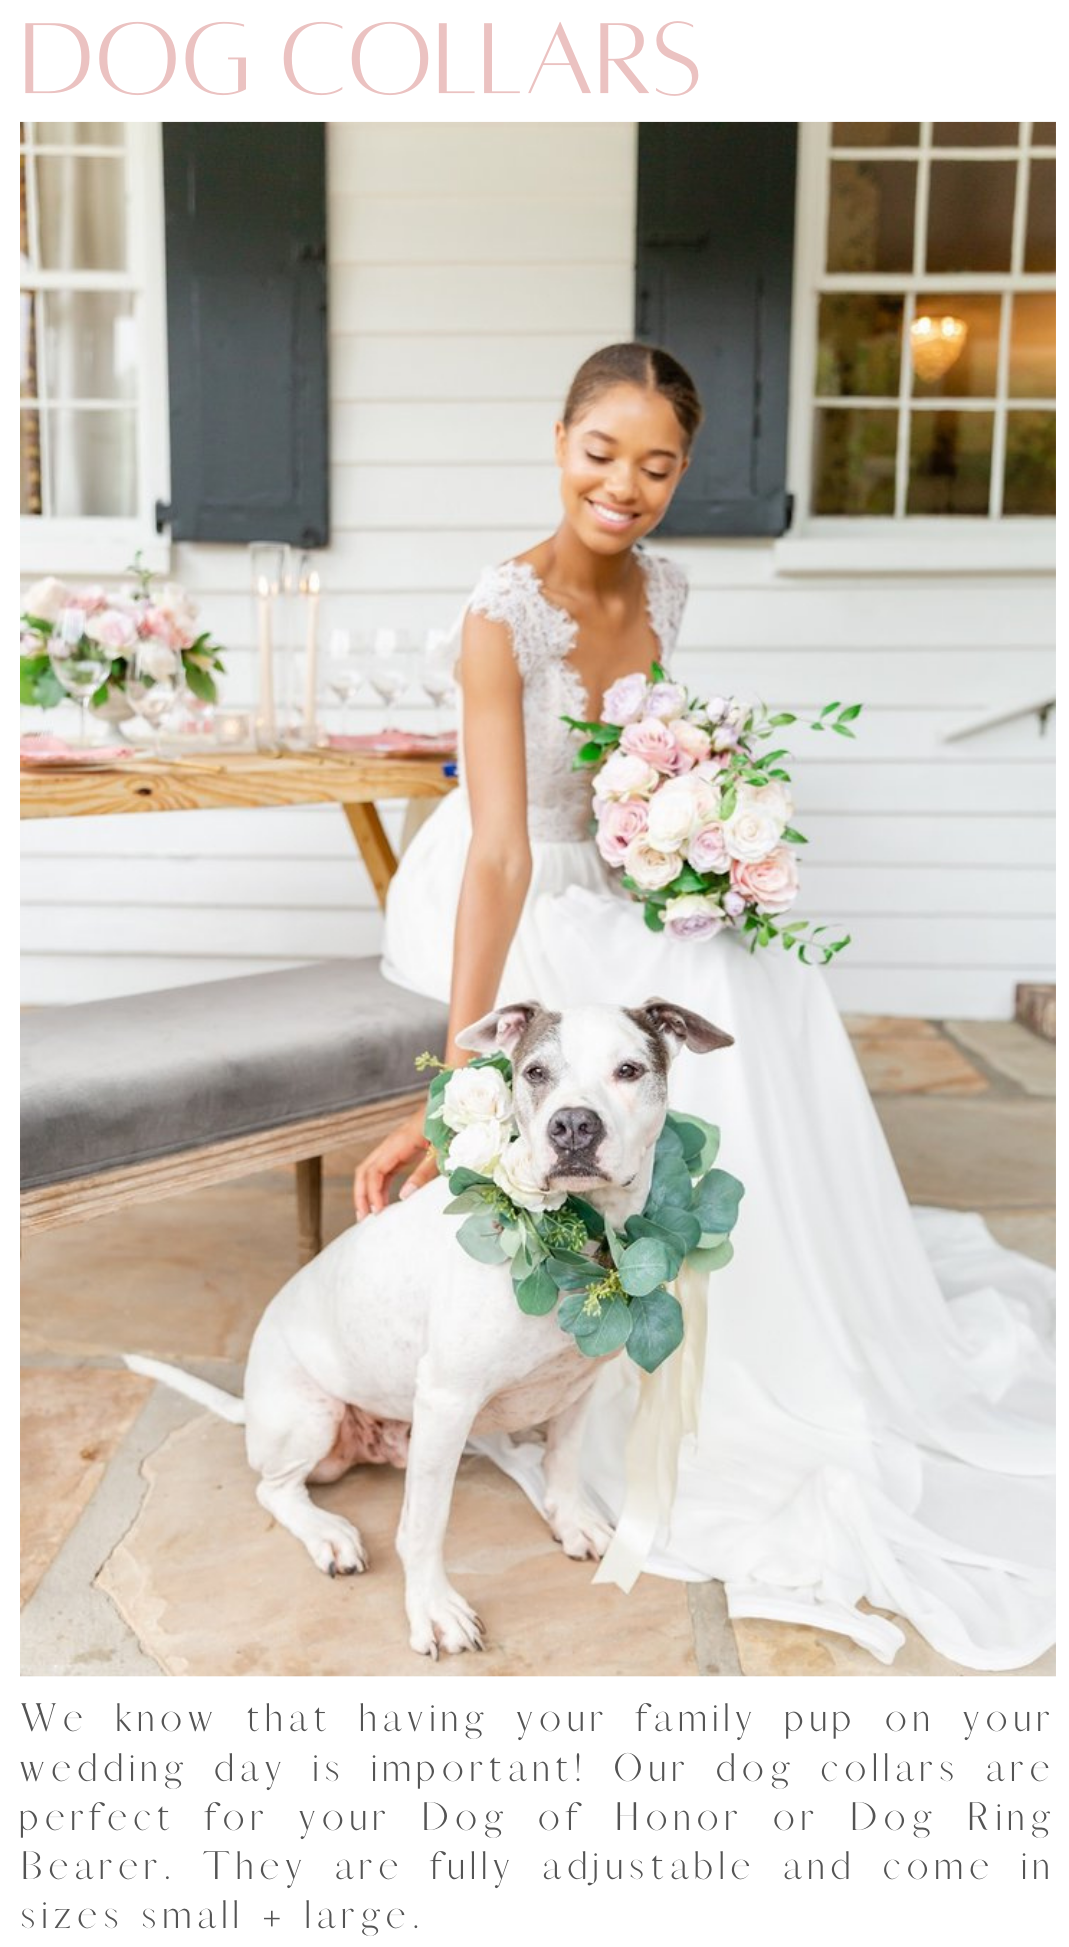 Shopping For Your Dog's Wedding Outfit? Shop Our Dog Collars!